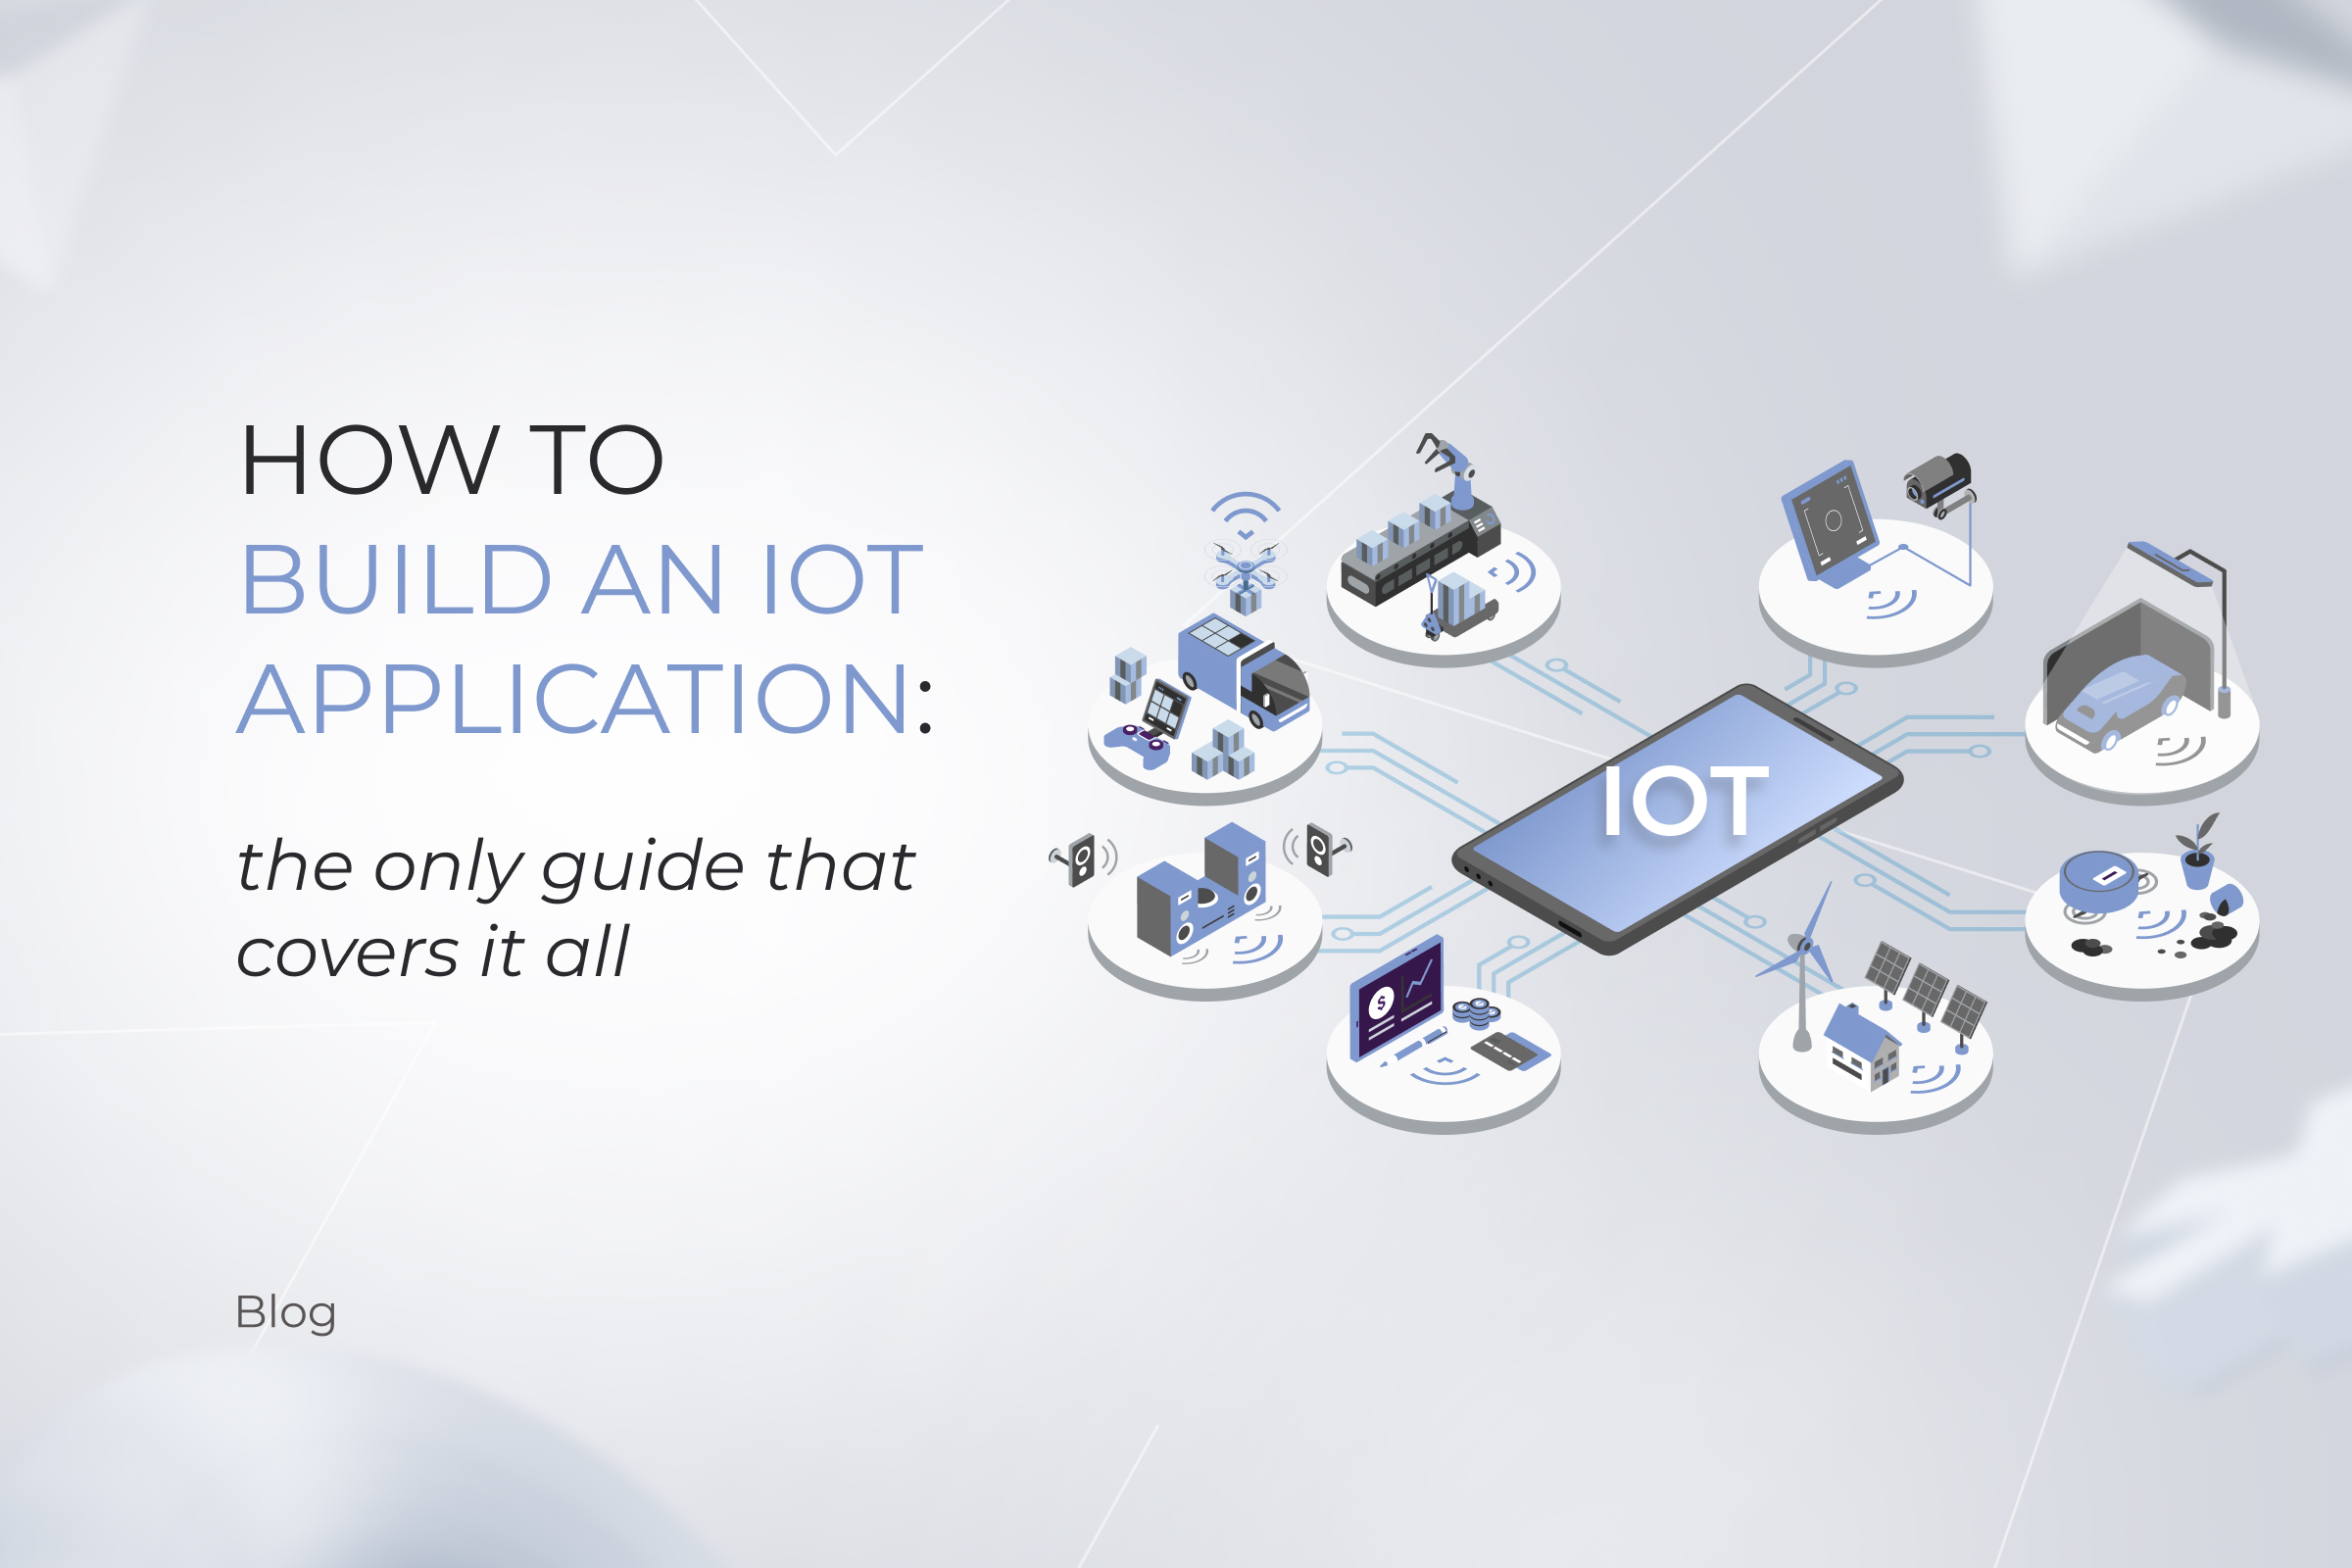 How to Build an IoT Application: the Only Guide That Covers It All